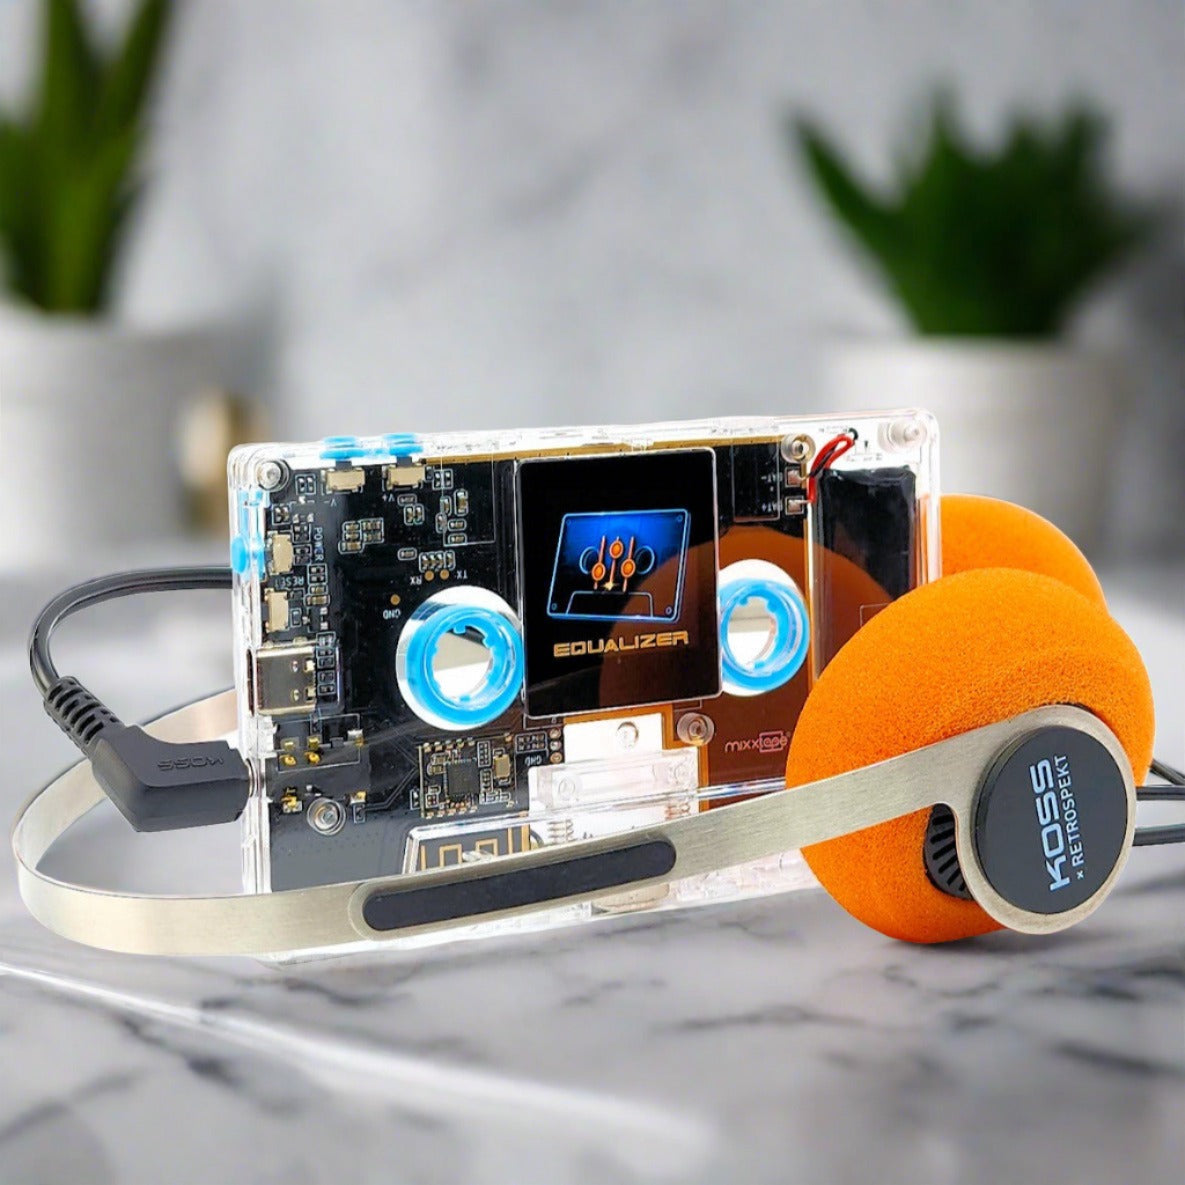 Mixxtape, a groundbreaking fusion of nostalgia and innovation in the world of music. Its retro-inspired design houses a high-resolution touch display, Bluetooth connectivity, and a USB Type-C port for charging and data transfer. The device boasts features such as high-resolution audio playback, a headphone jack, and support for additional memory via microSD card. What sets Mixxtape apart is its ability to play as an actual cassette tape, providing a tangible connection to music and artists. 